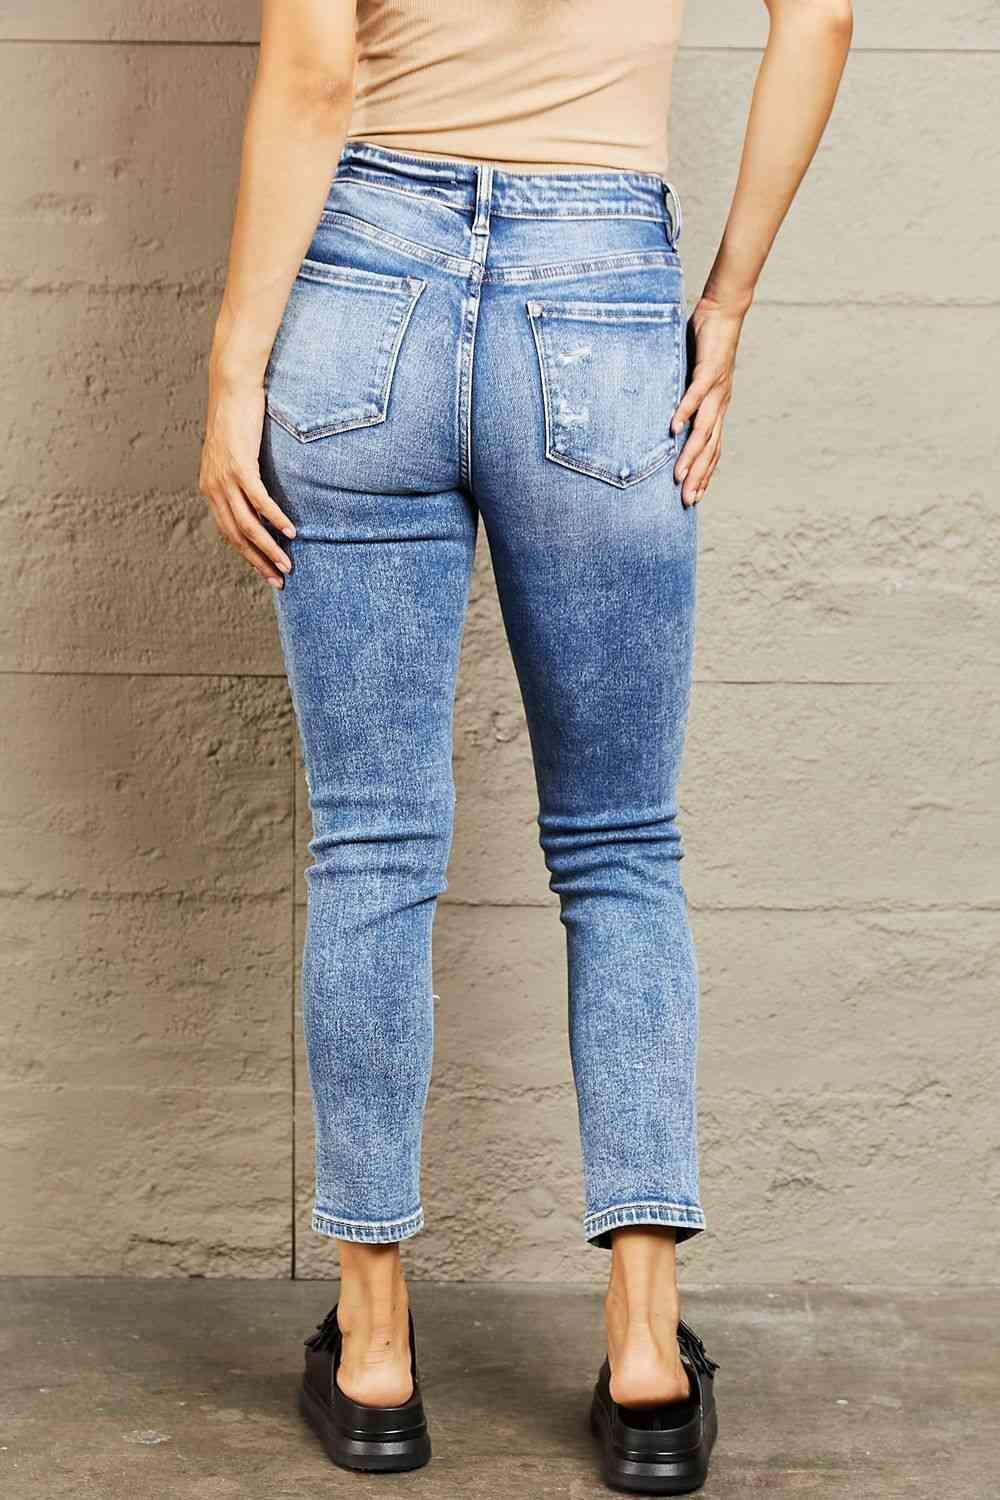 All Day Wear Cropped Ripped Skinny Jeans - MXSTUDIO.COM